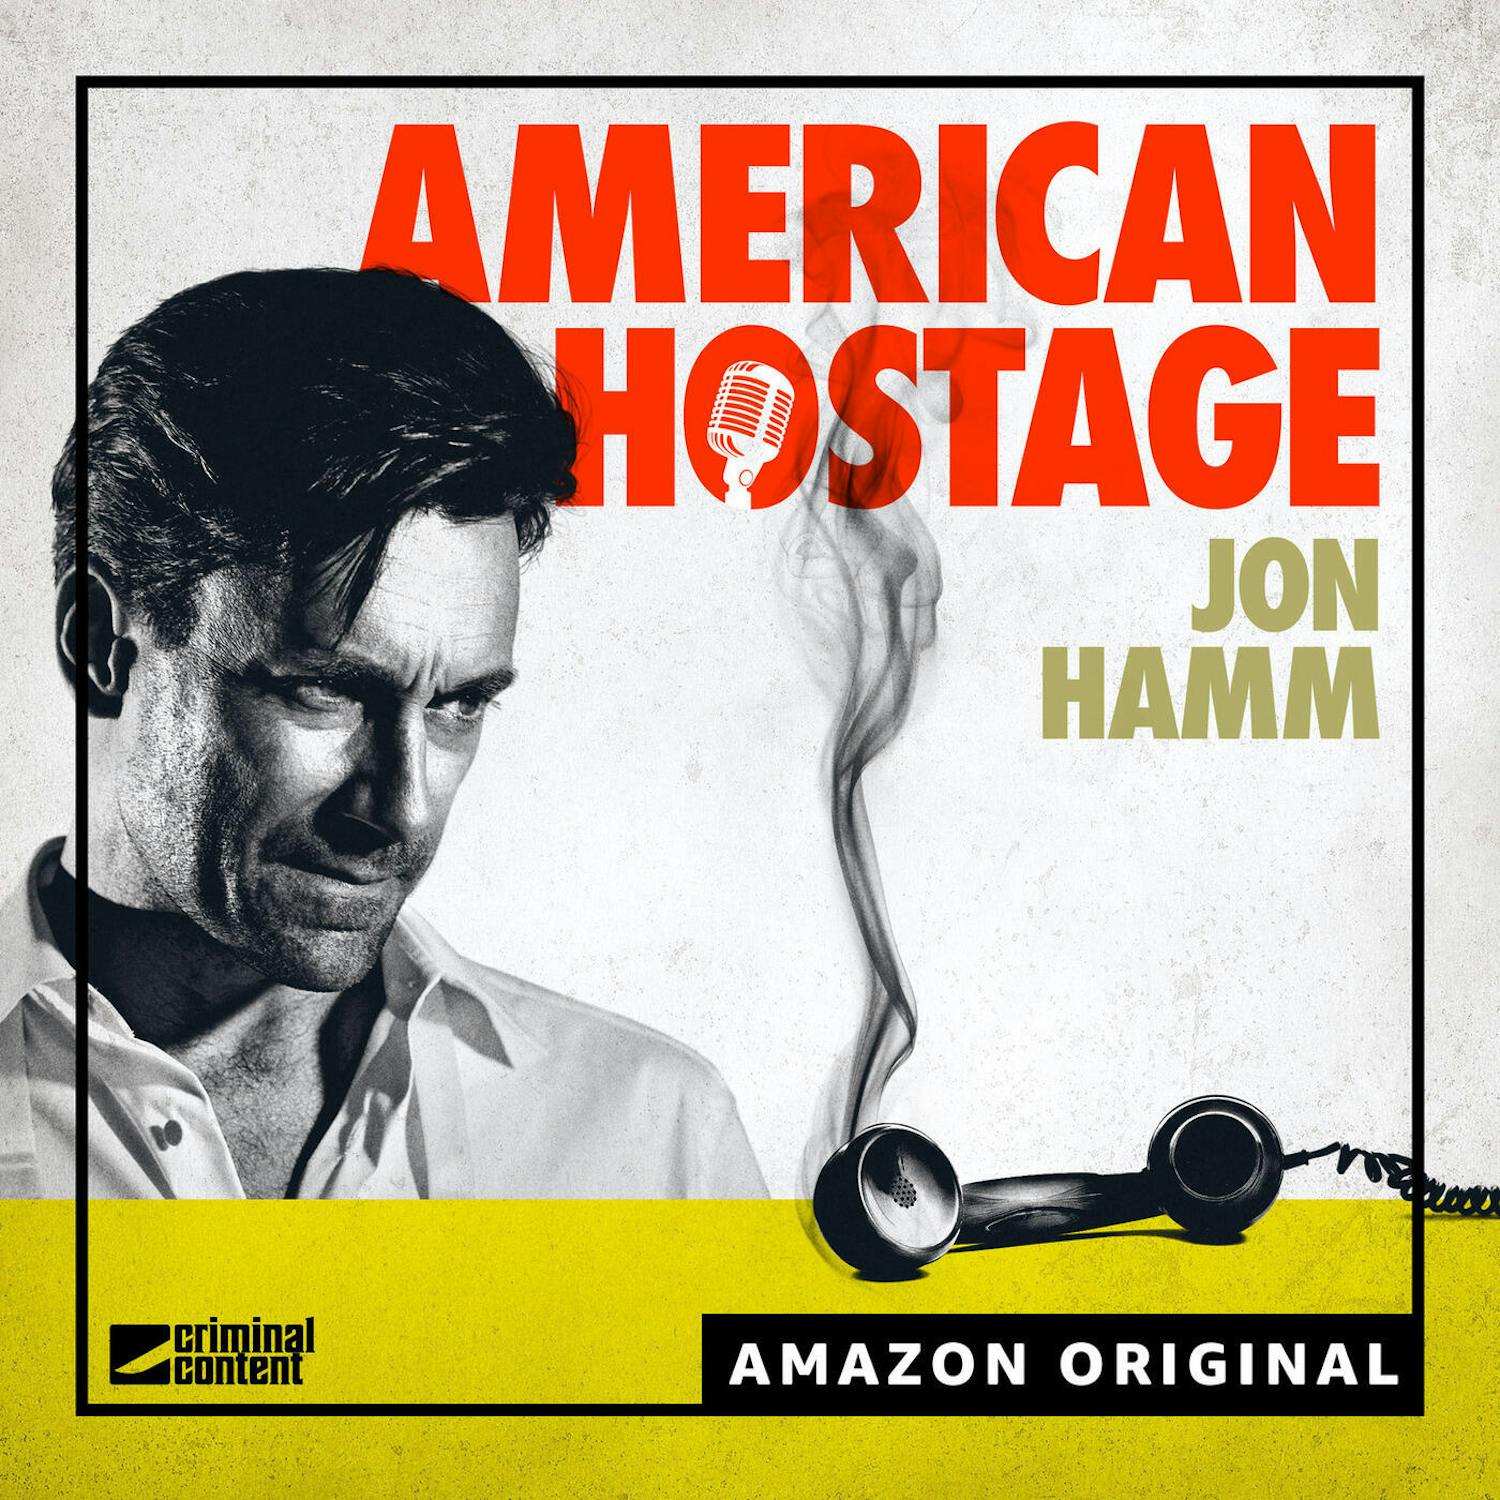 Introducing: American Hostage